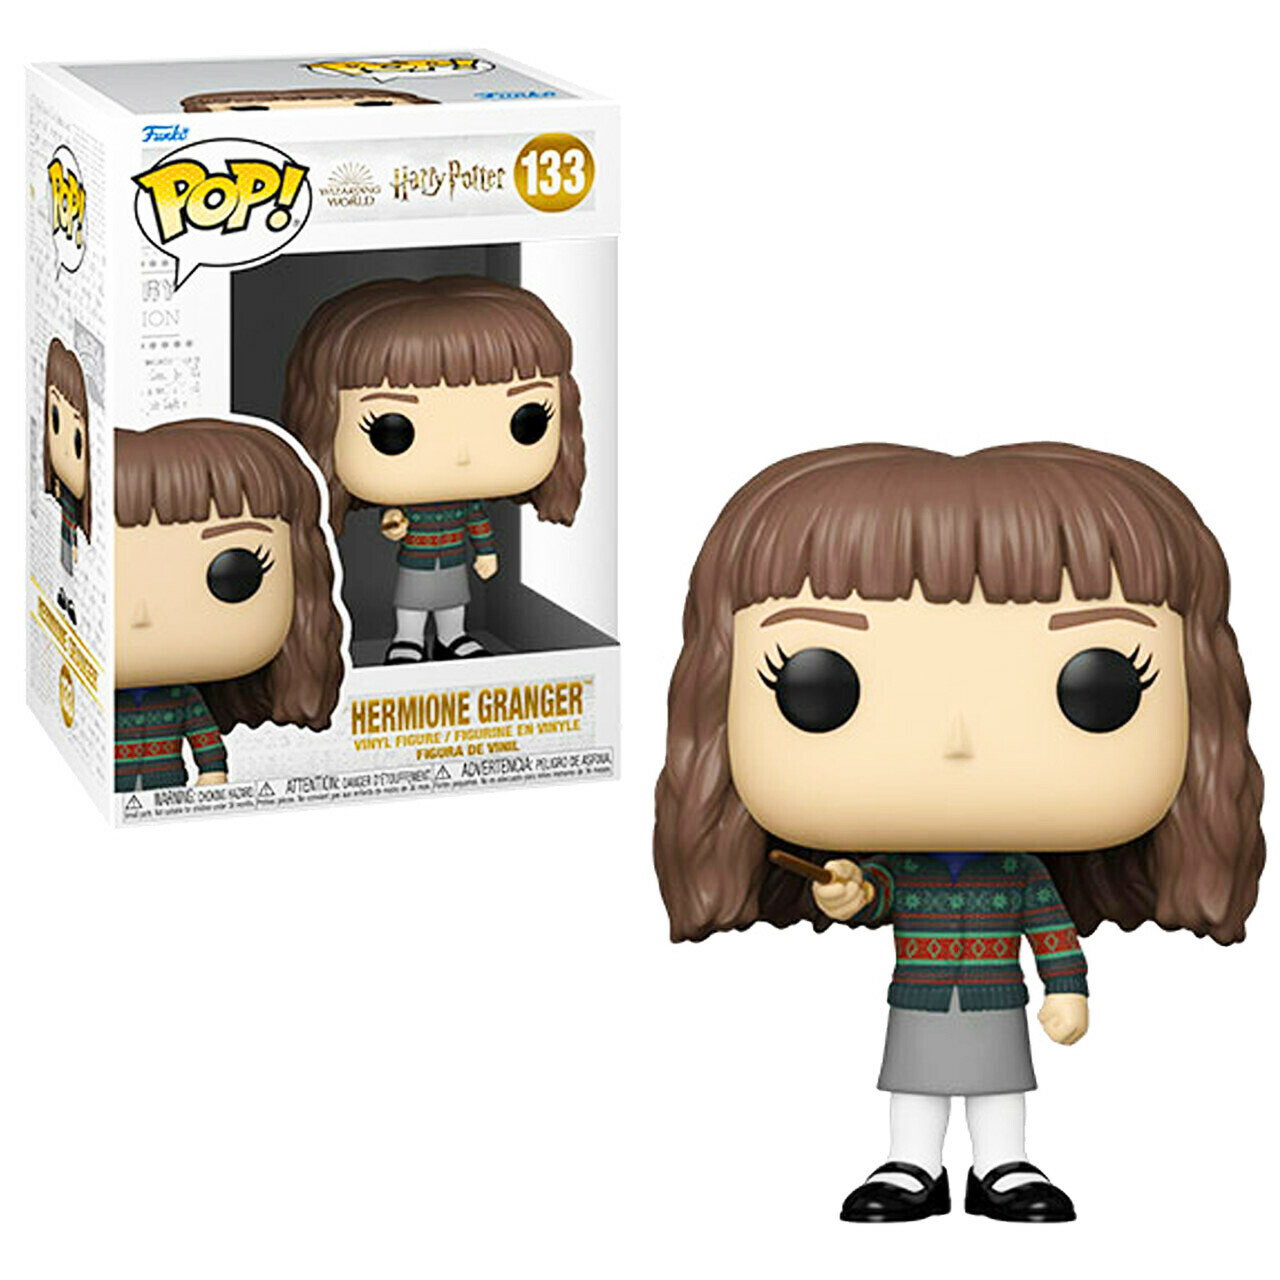 Buy Pop! Harry Potter with Stone at Funko.